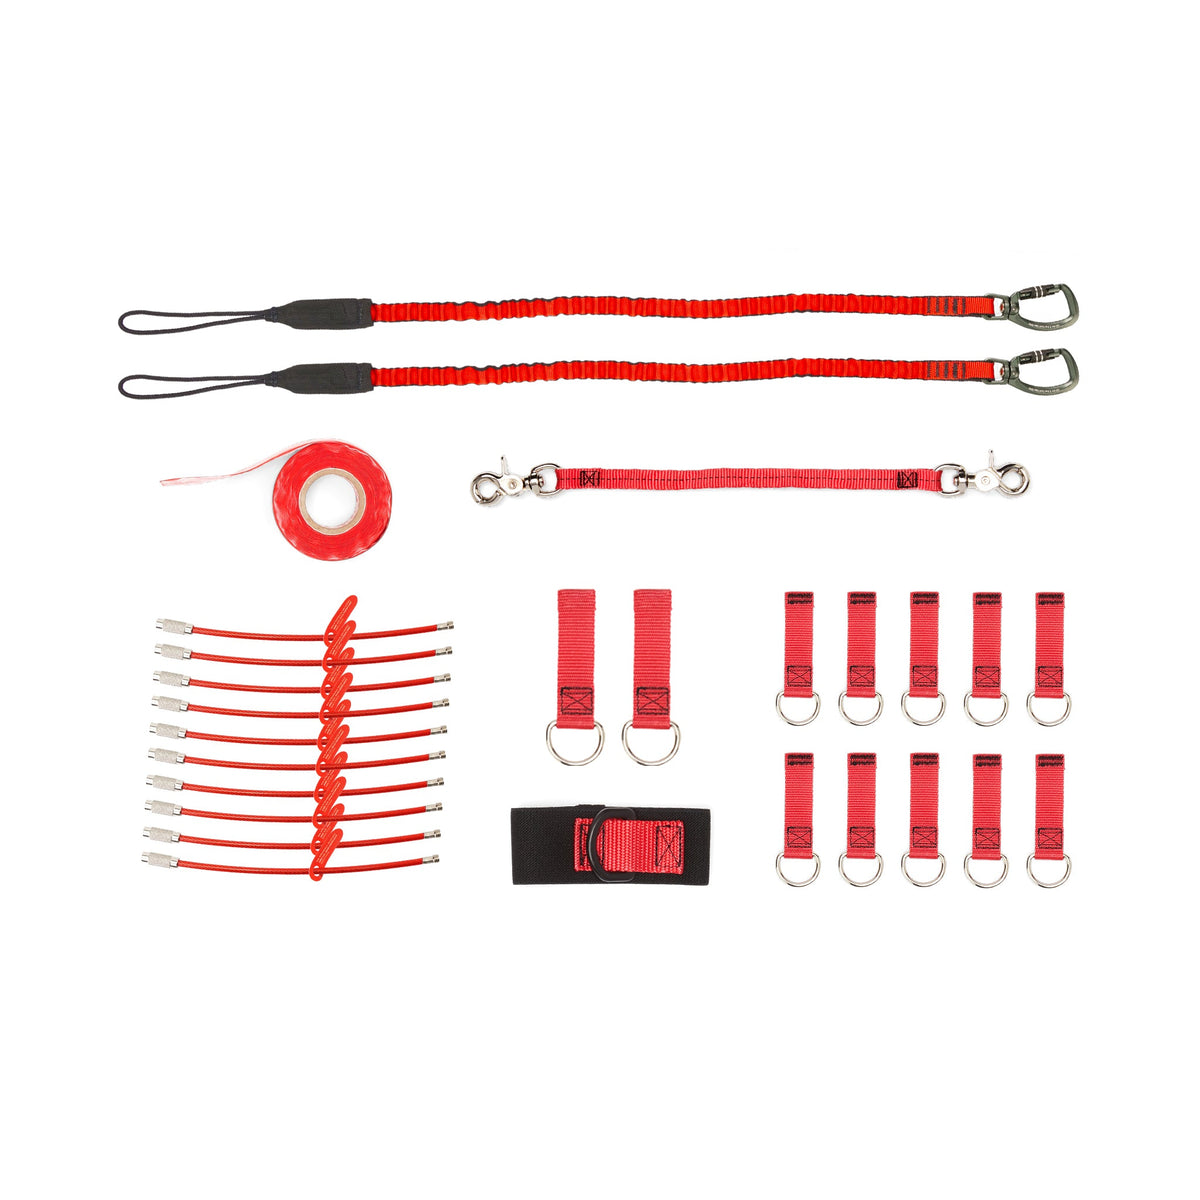 GRIPPS® Riggers Trade Kit